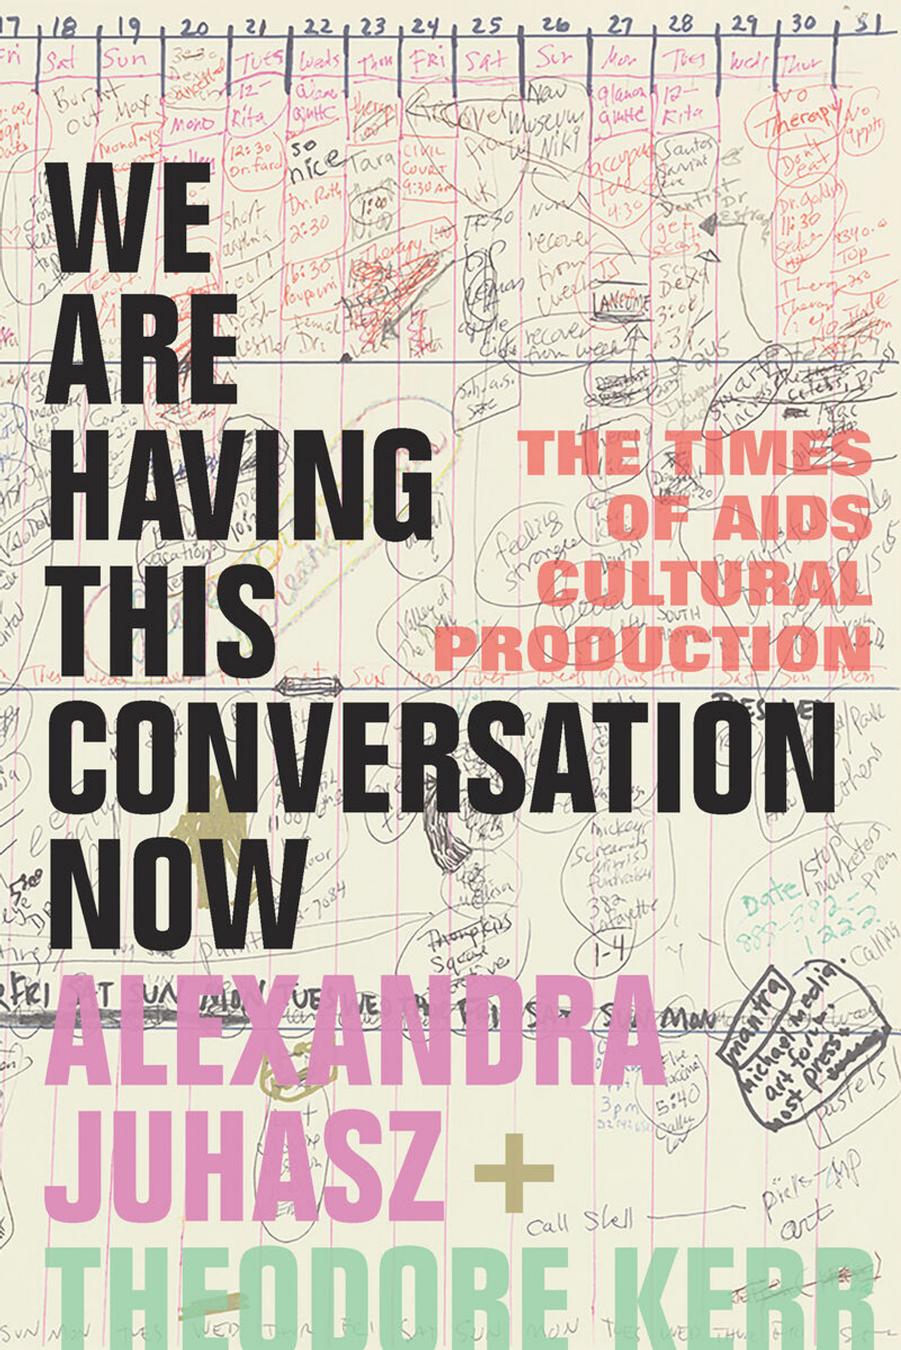 We Are Having This Conversation Now: The Times of AIDS Cultural Production by Alexandra Juhasz Theodore Kerr